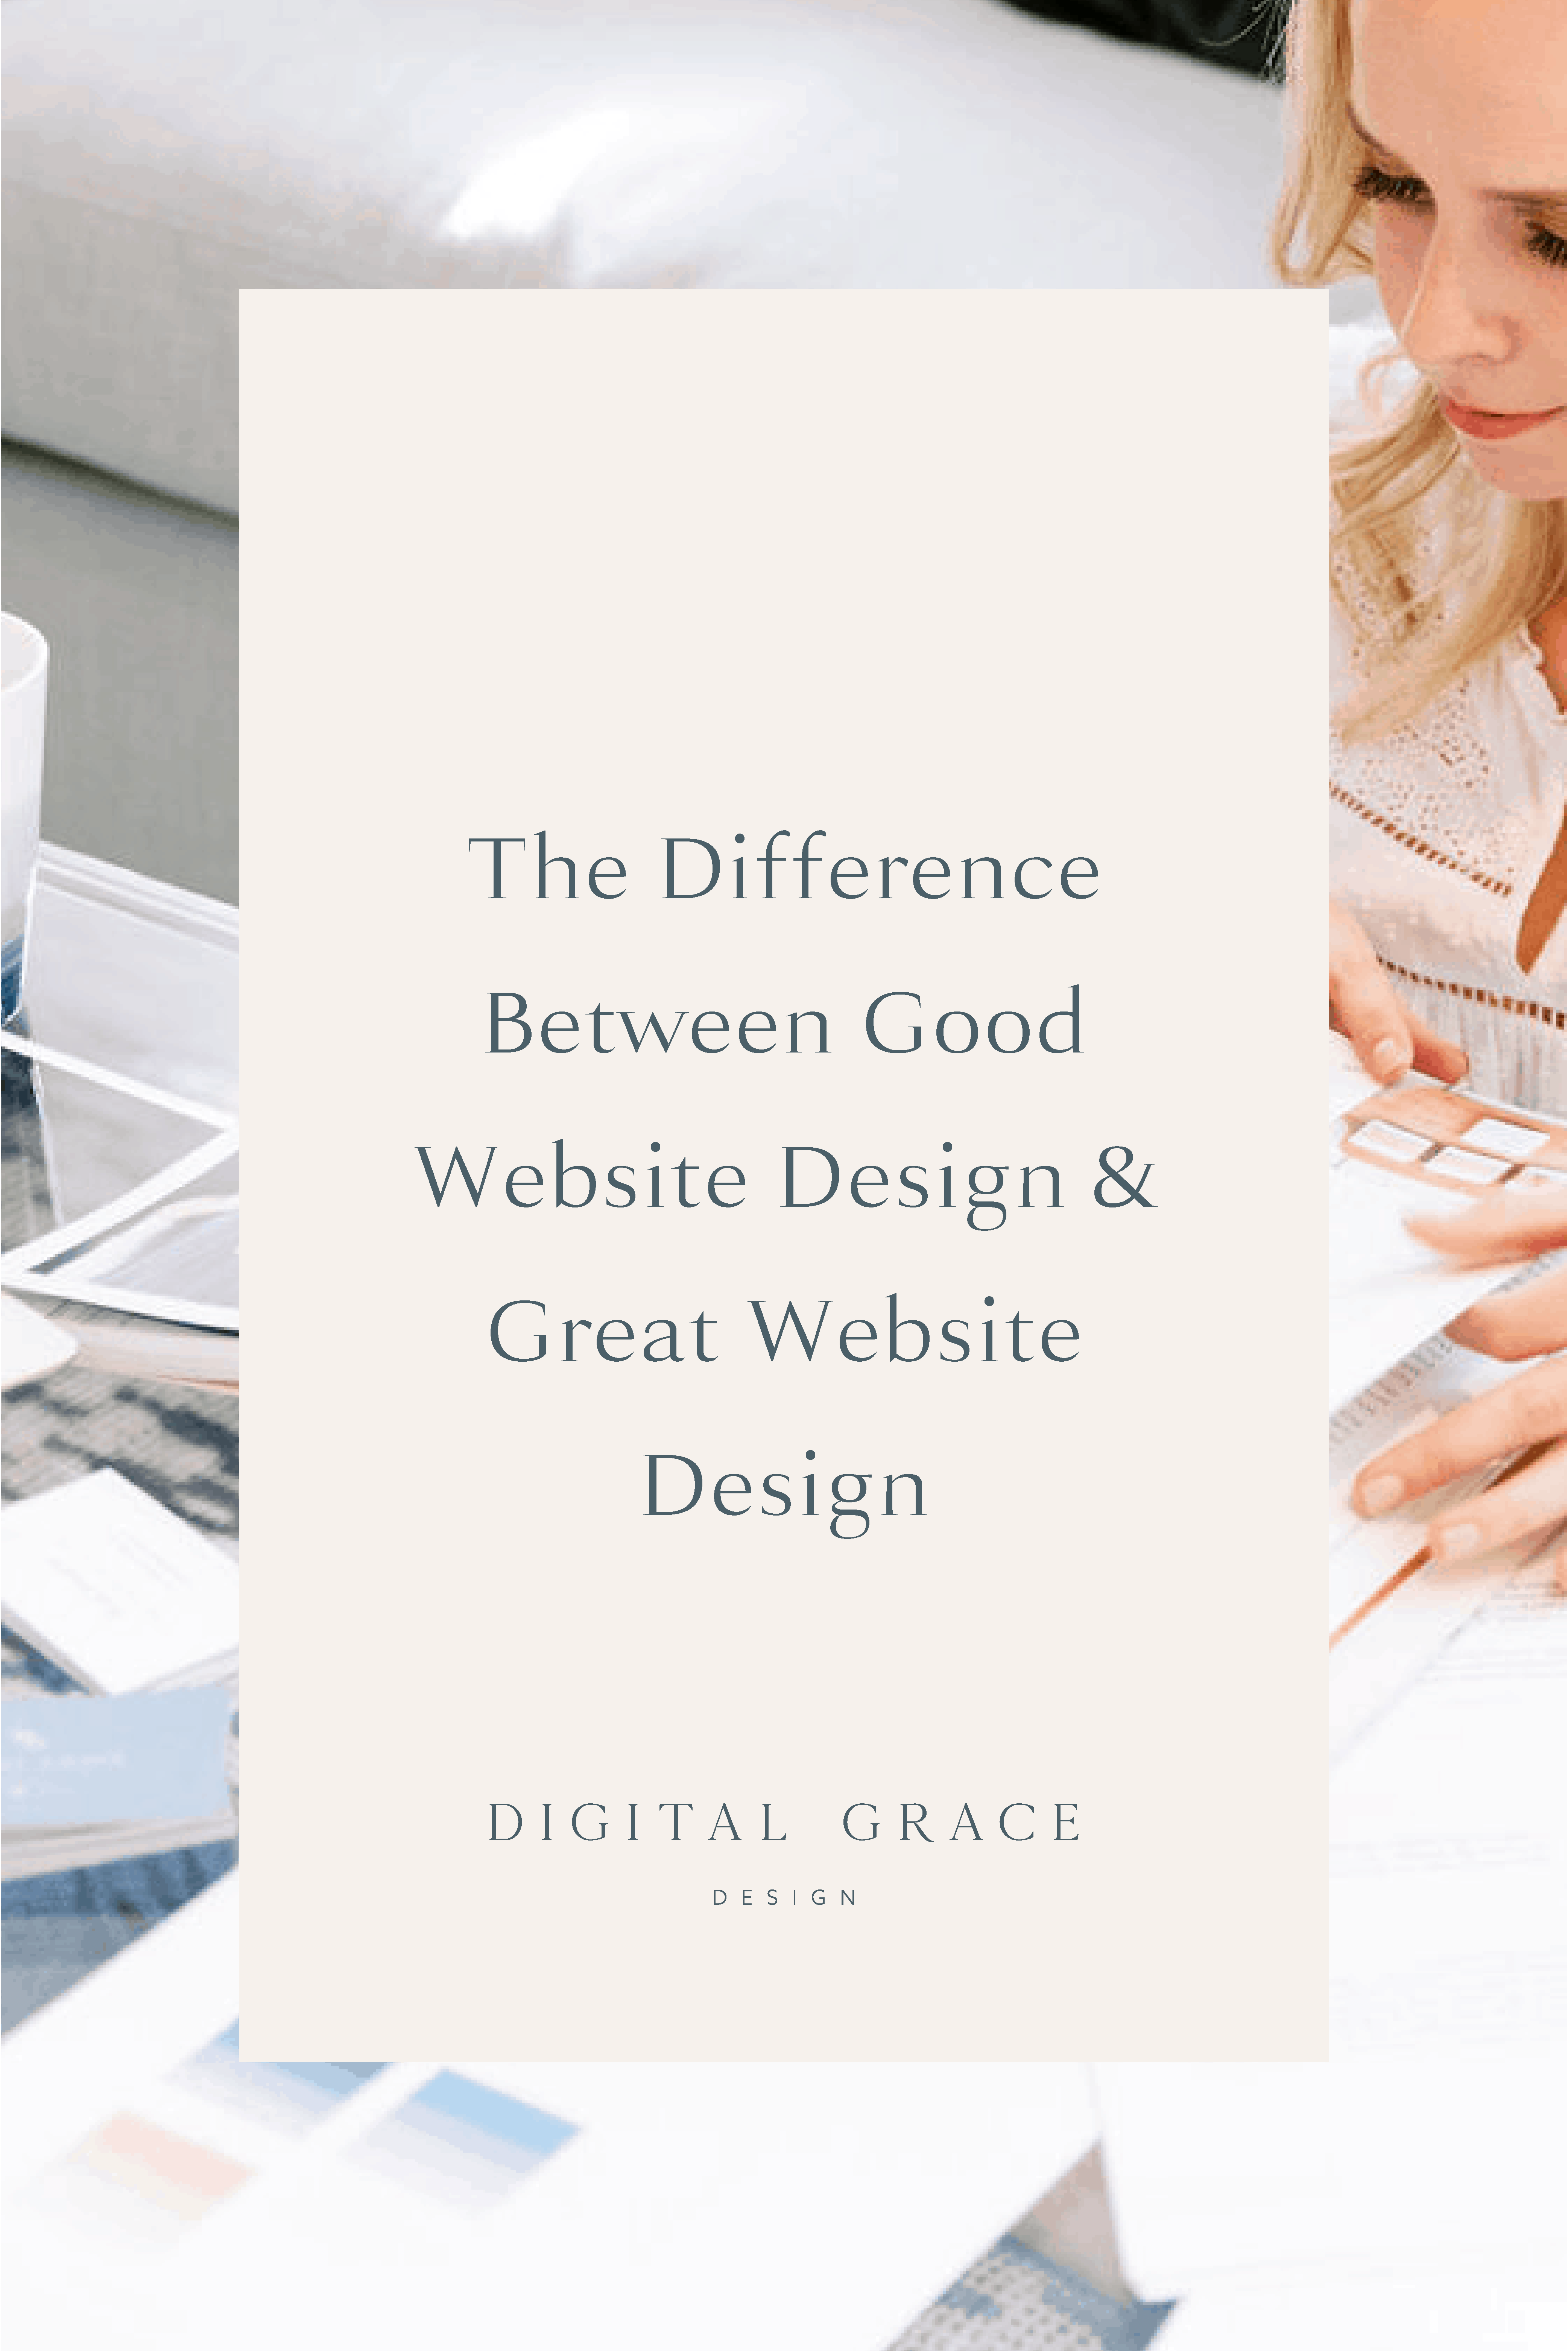 The Difference Between Good and Great Website Design